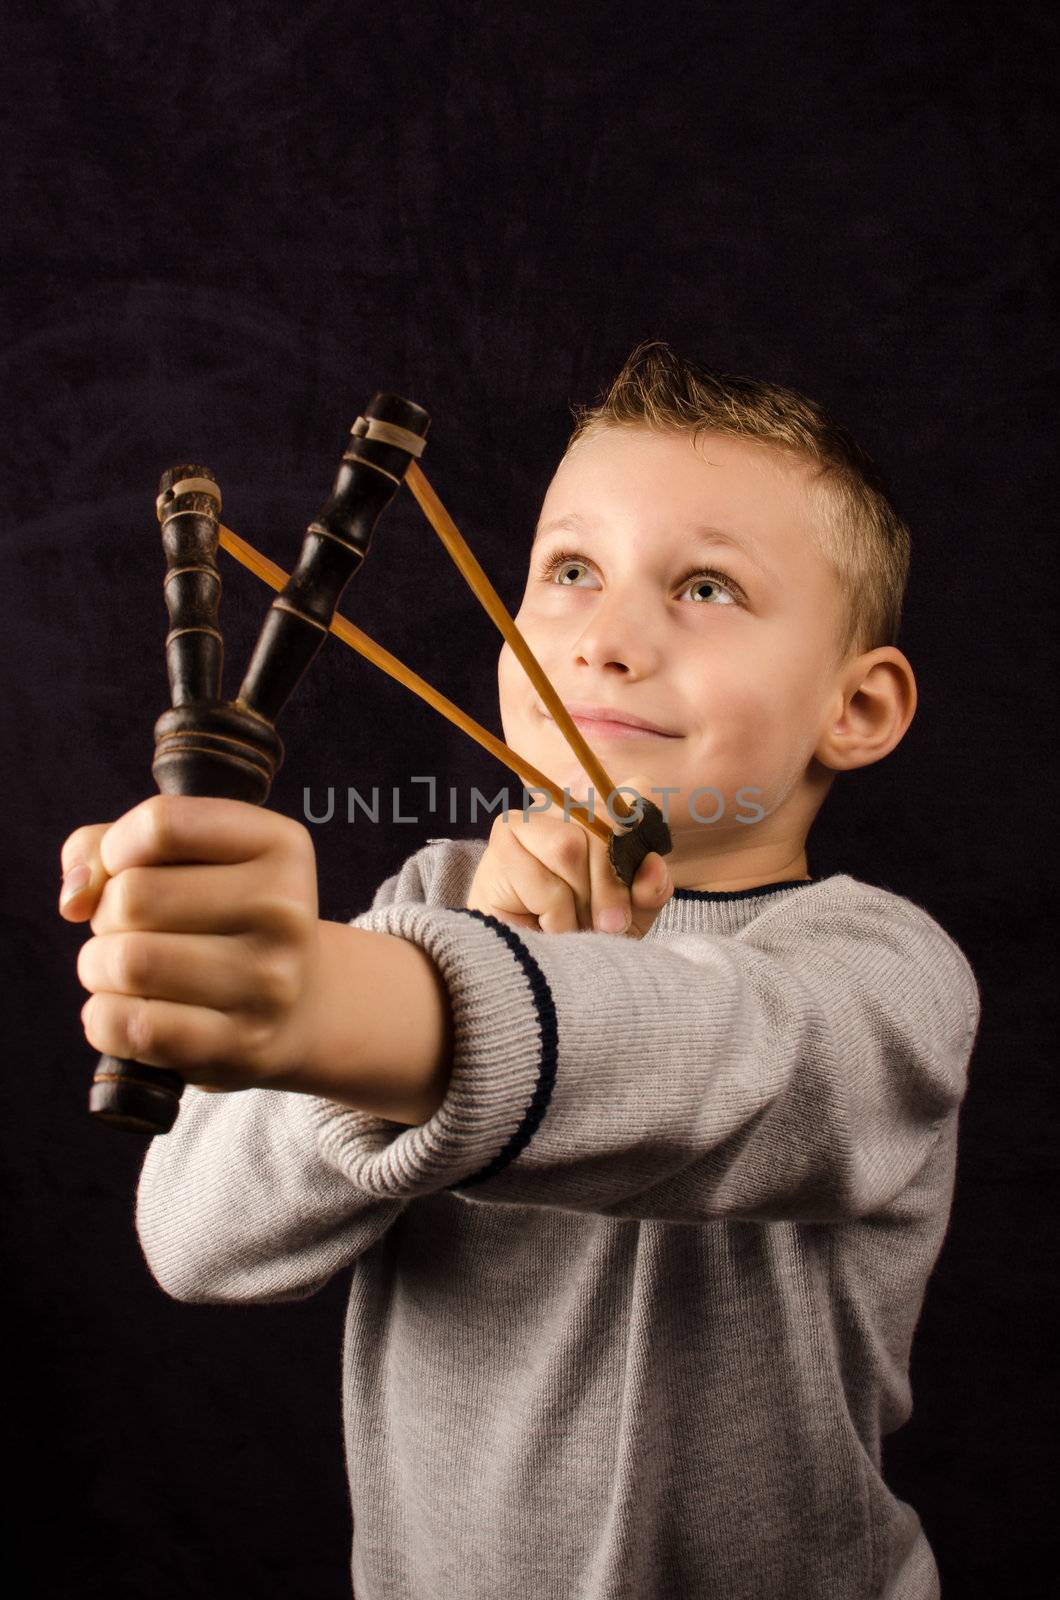 Studio photo of a young boy with slingshot